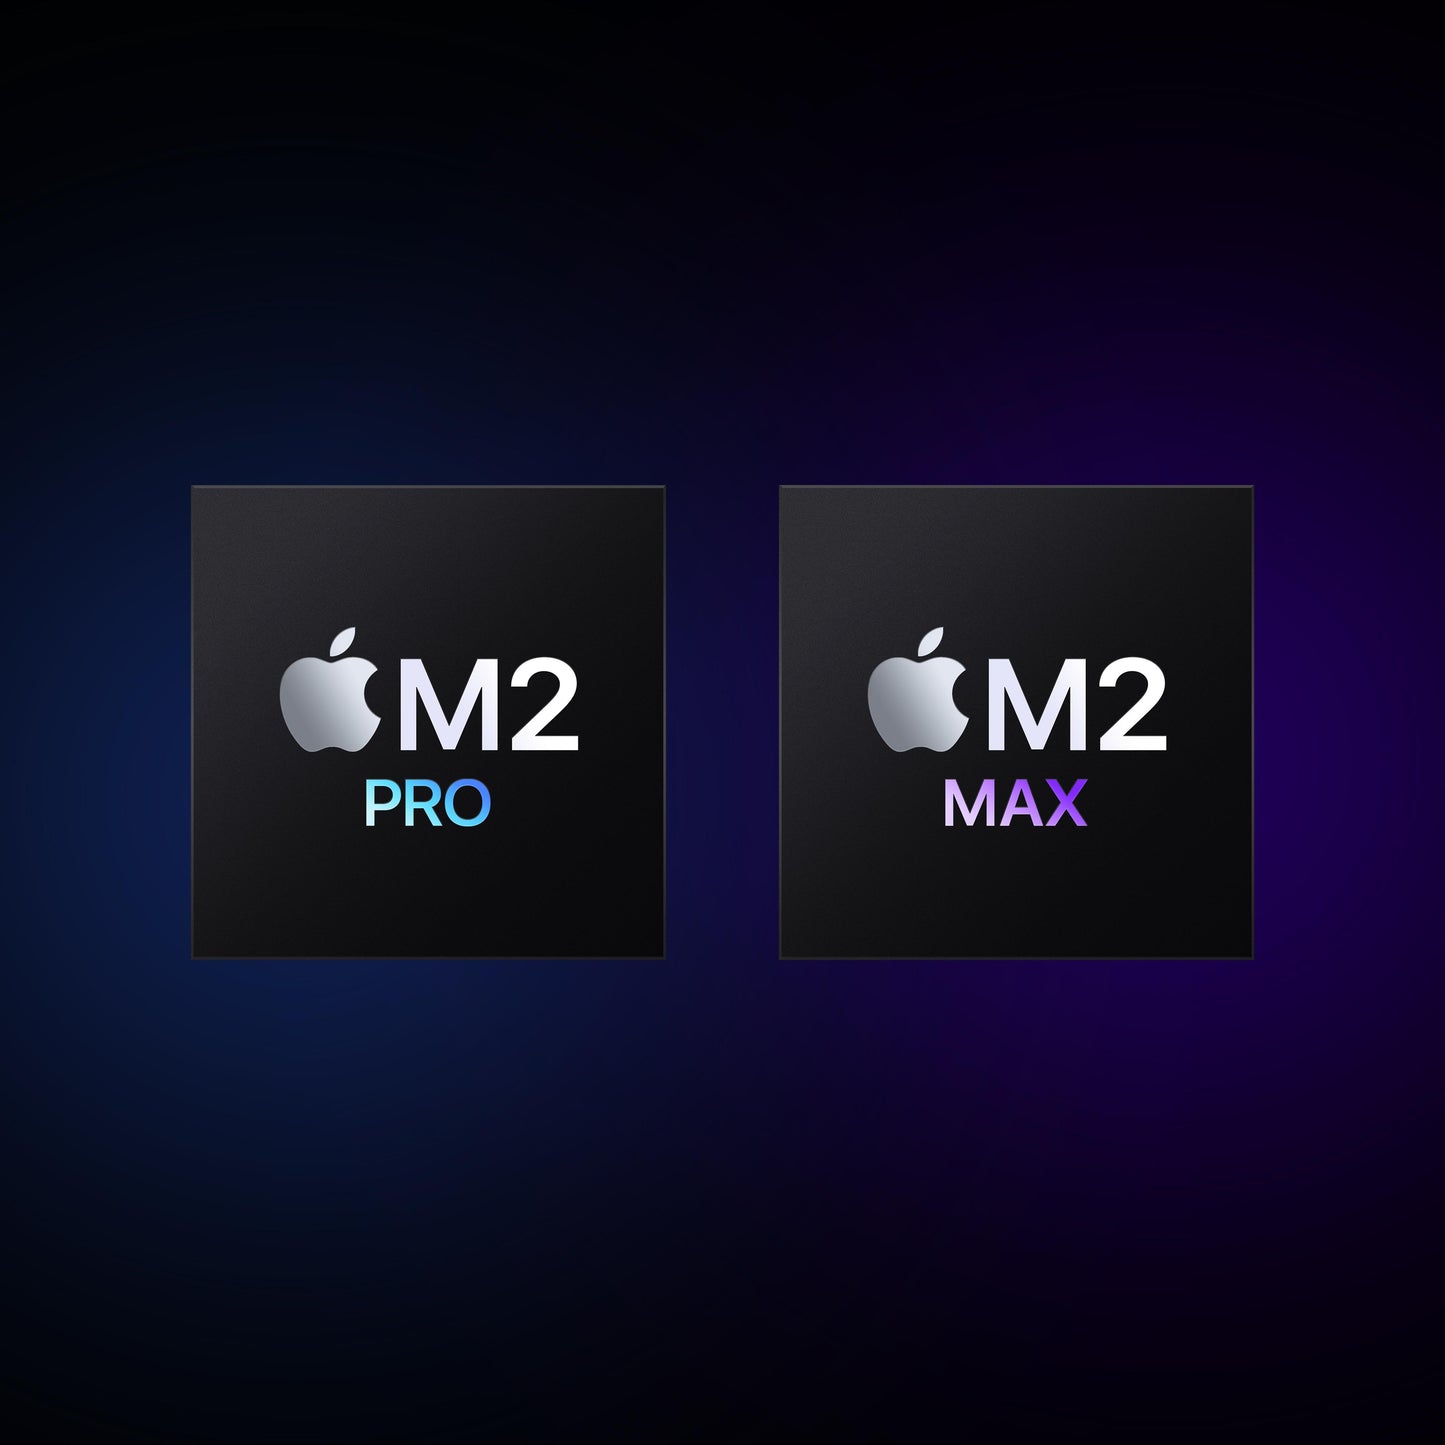 16-inch MacBook Pro: Apple M2 Max chip with 12?core CPU and 38?core GPU, 1TB SSD - Space Grey